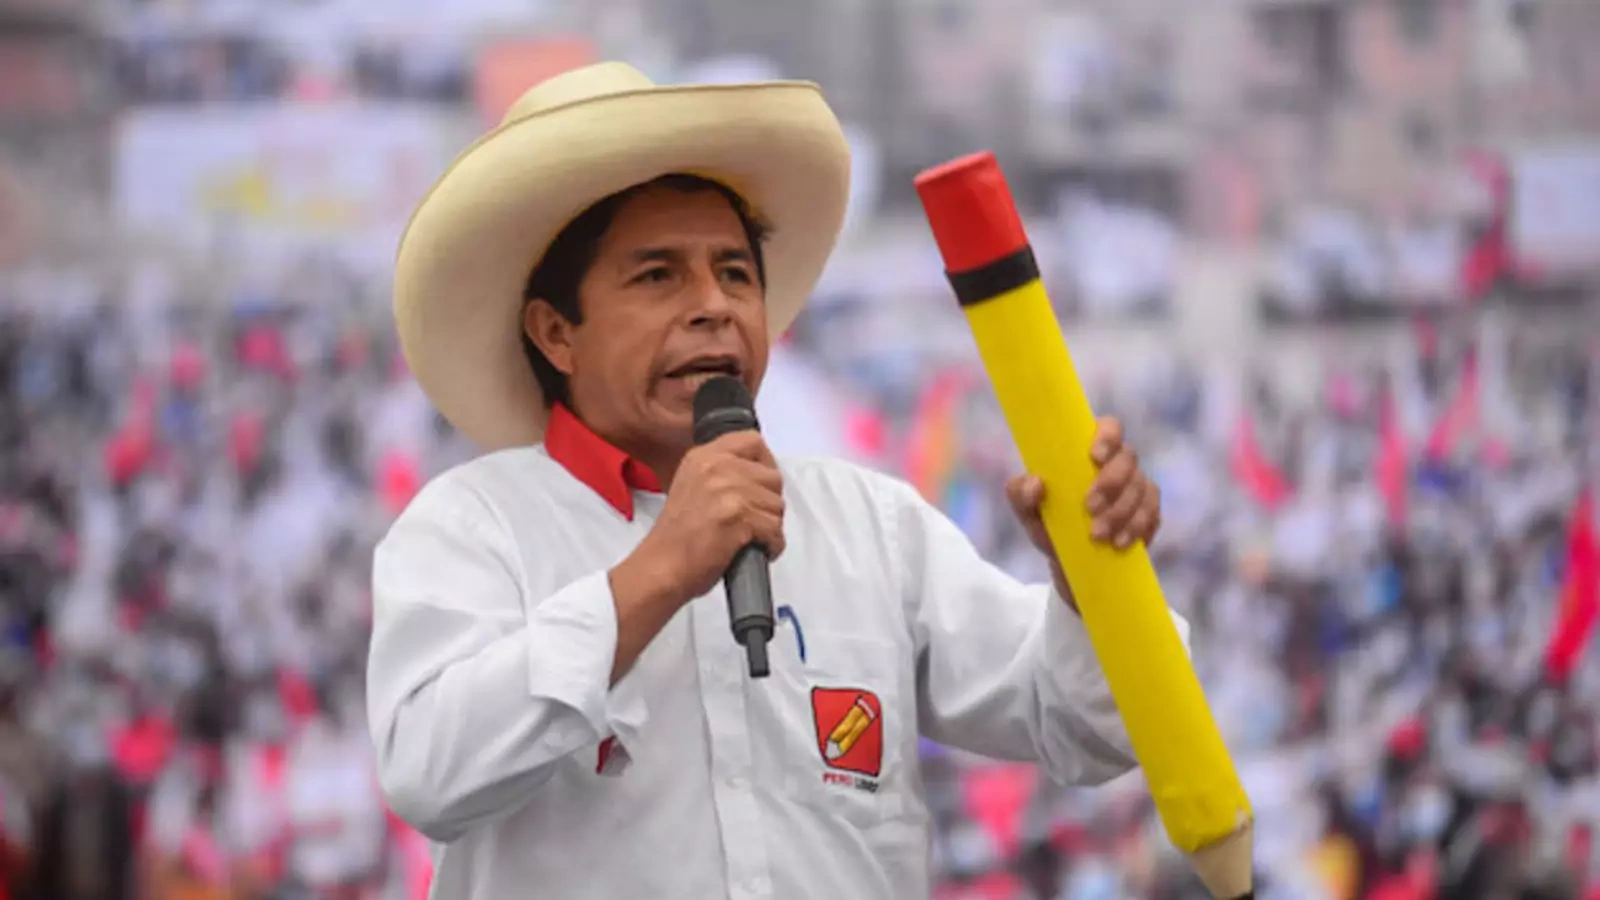 Peruvian President-elect Pedro Castillo speaks at a campaign rally in May 2021.